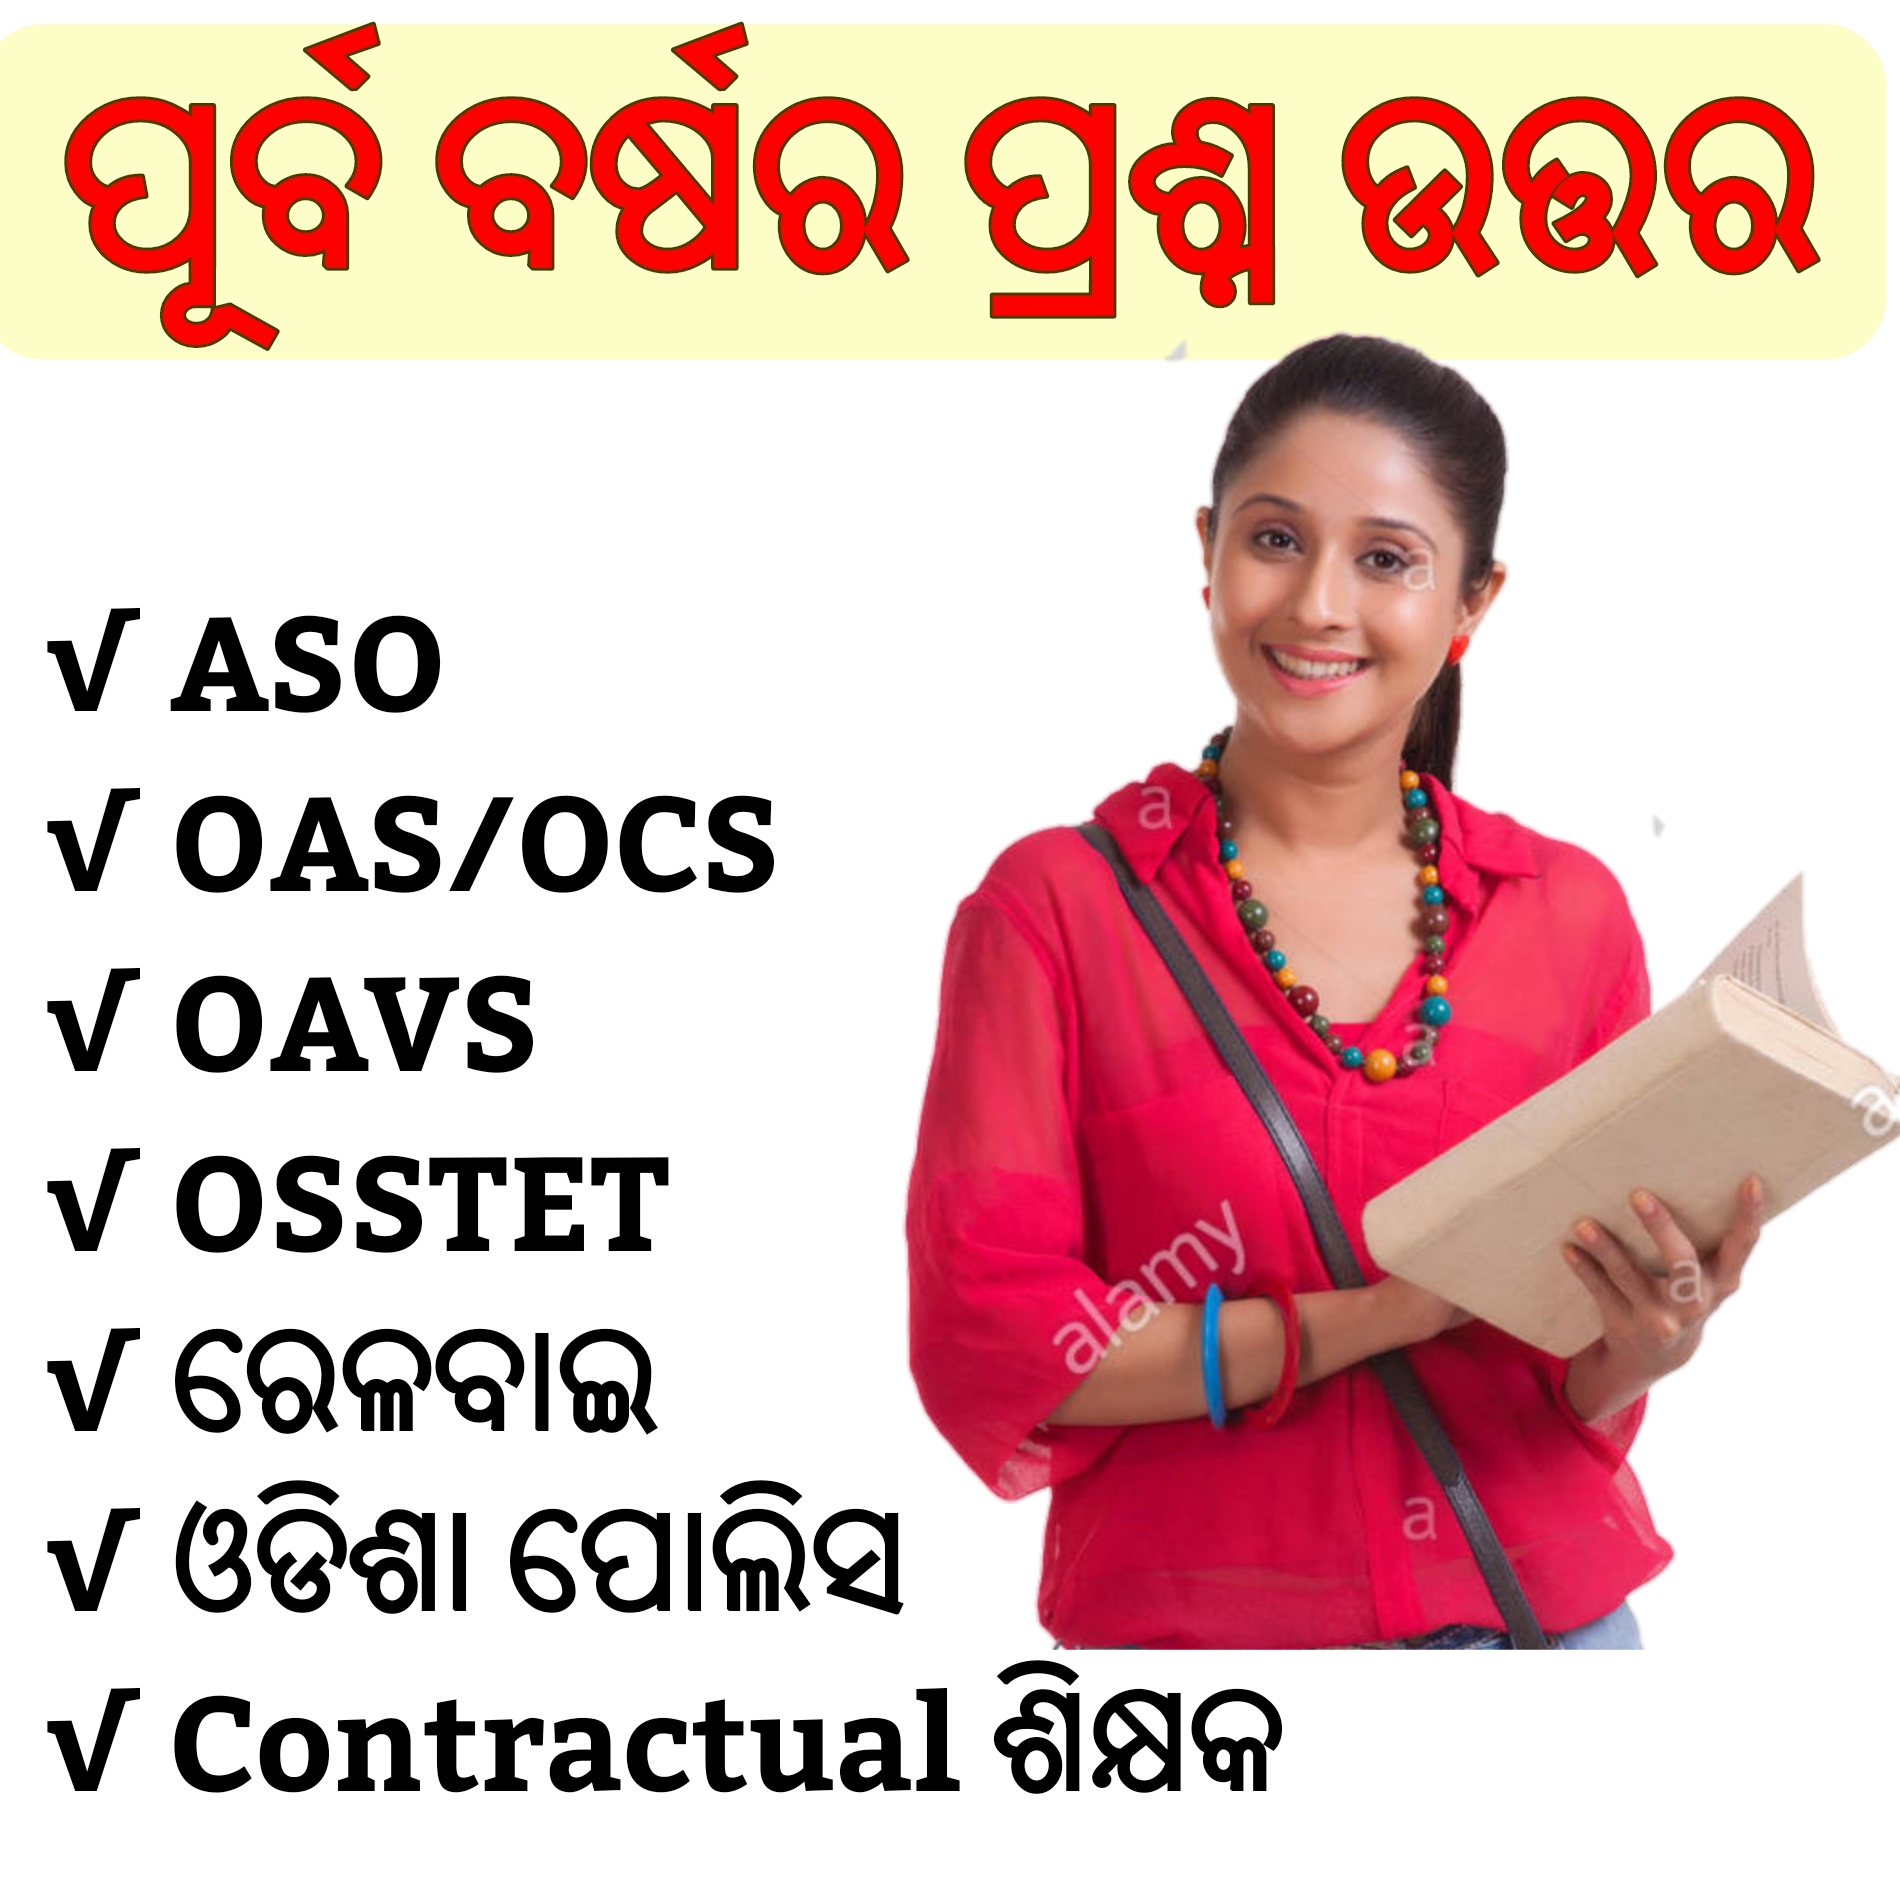 Z- 41,000 PYQ- COMBO ODISHA PREVIOUS YEAR (OSSSC, OSSC, OPSC, Police, CT, B.ED & Other) (Subject Wise & Topic Wise) Questions & Answer